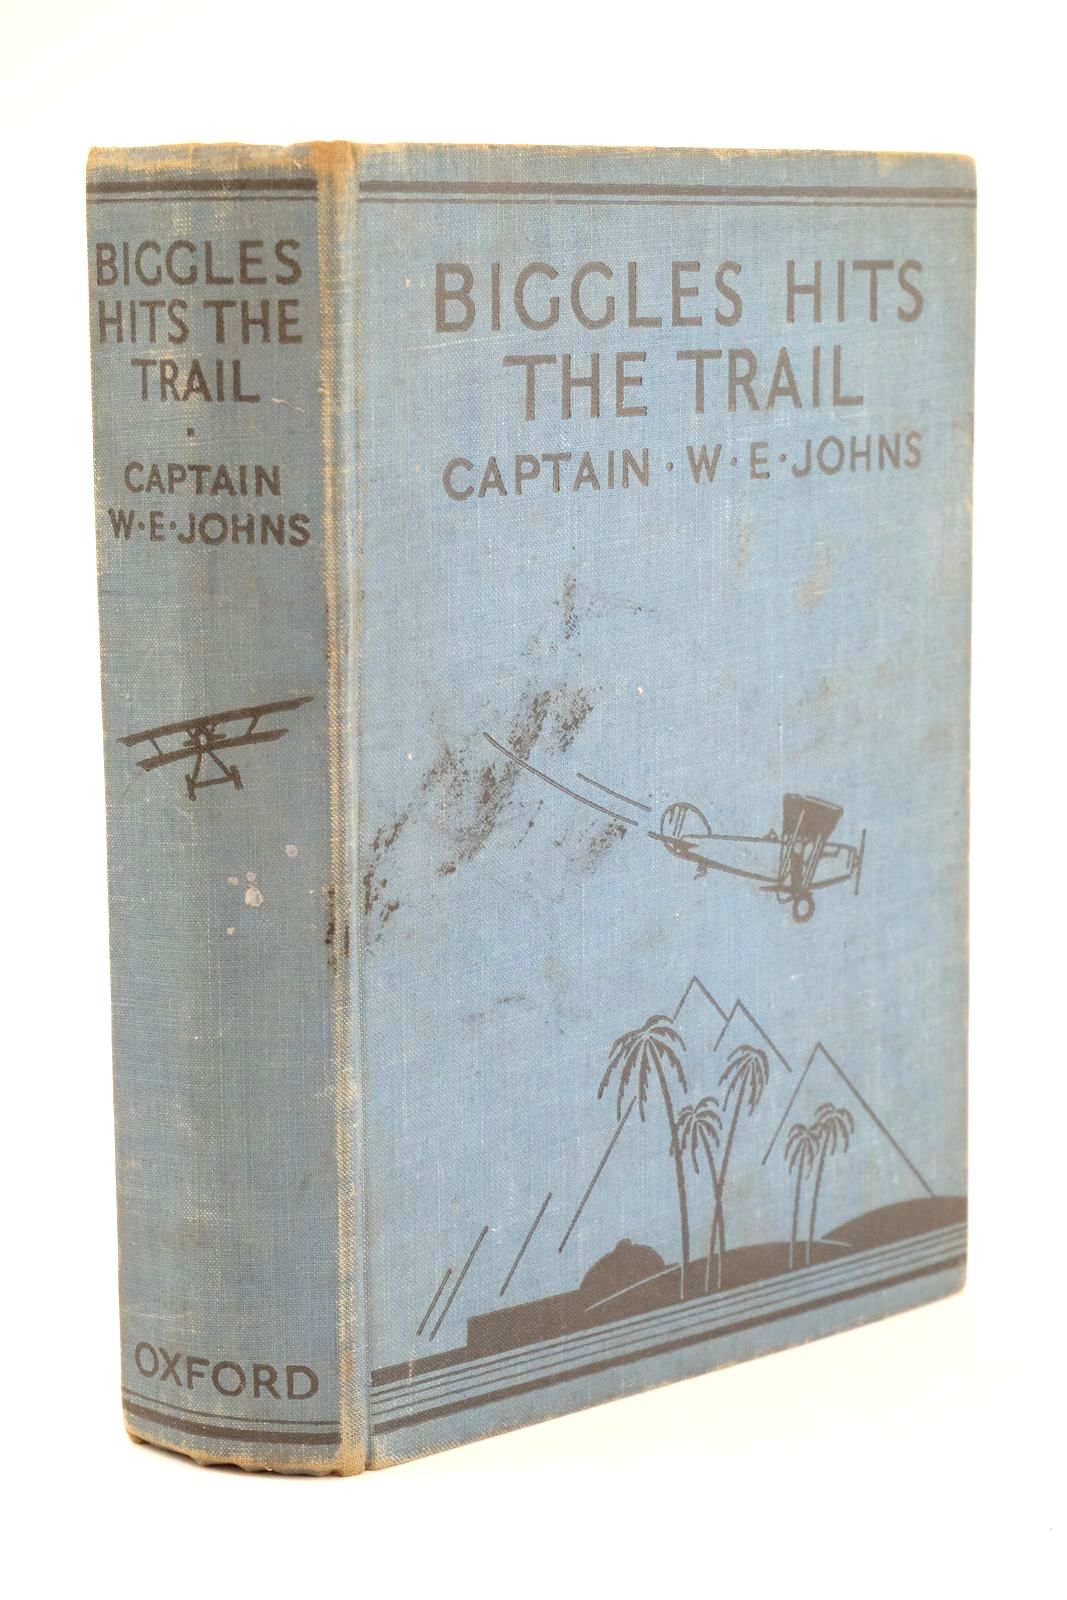 Photo of BIGGLES HITS THE TRAIL written by Johns, W.E. illustrated by Leigh, Howard Sindall, Alfred published by Oxford University Press, Humphrey Milford (STOCK CODE: 1324982)  for sale by Stella & Rose's Books